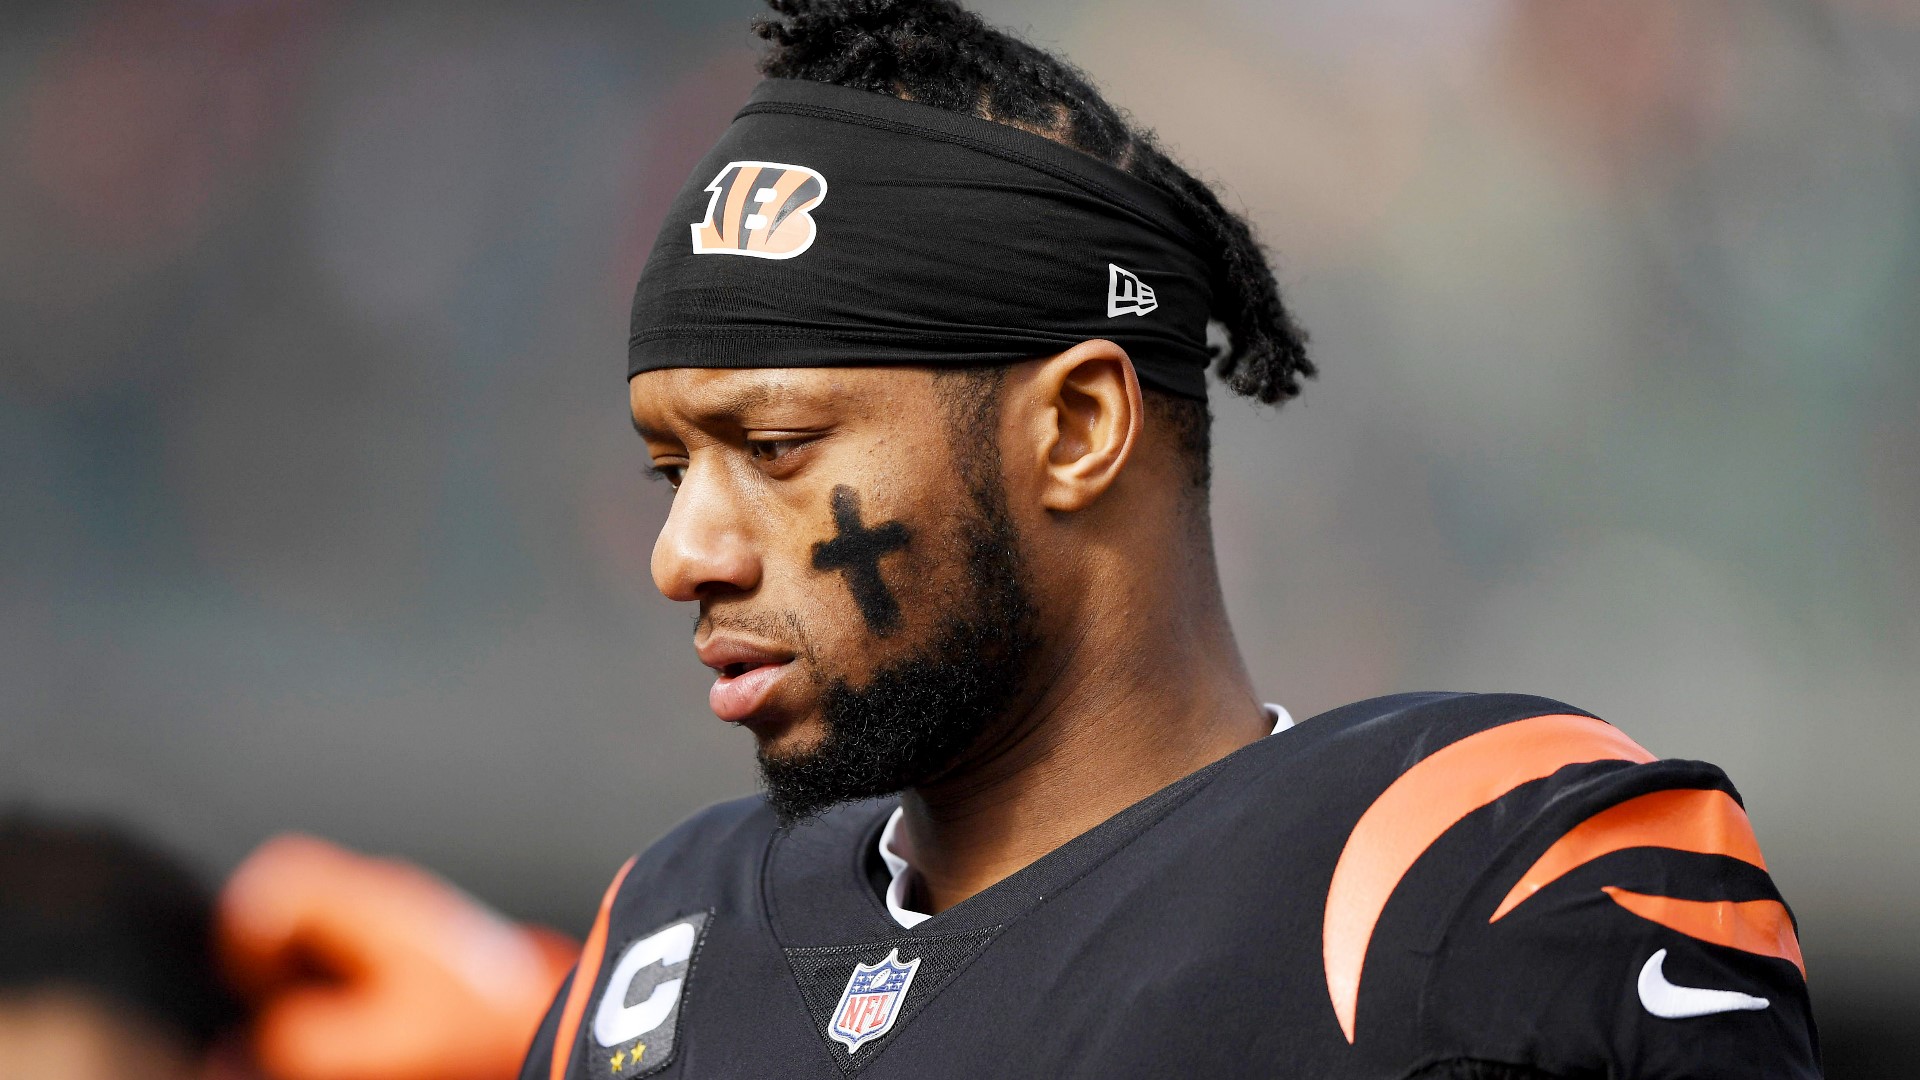 A statement issued Friday by the Bengals said they were aware of the charge and were “monitoring the situation.”